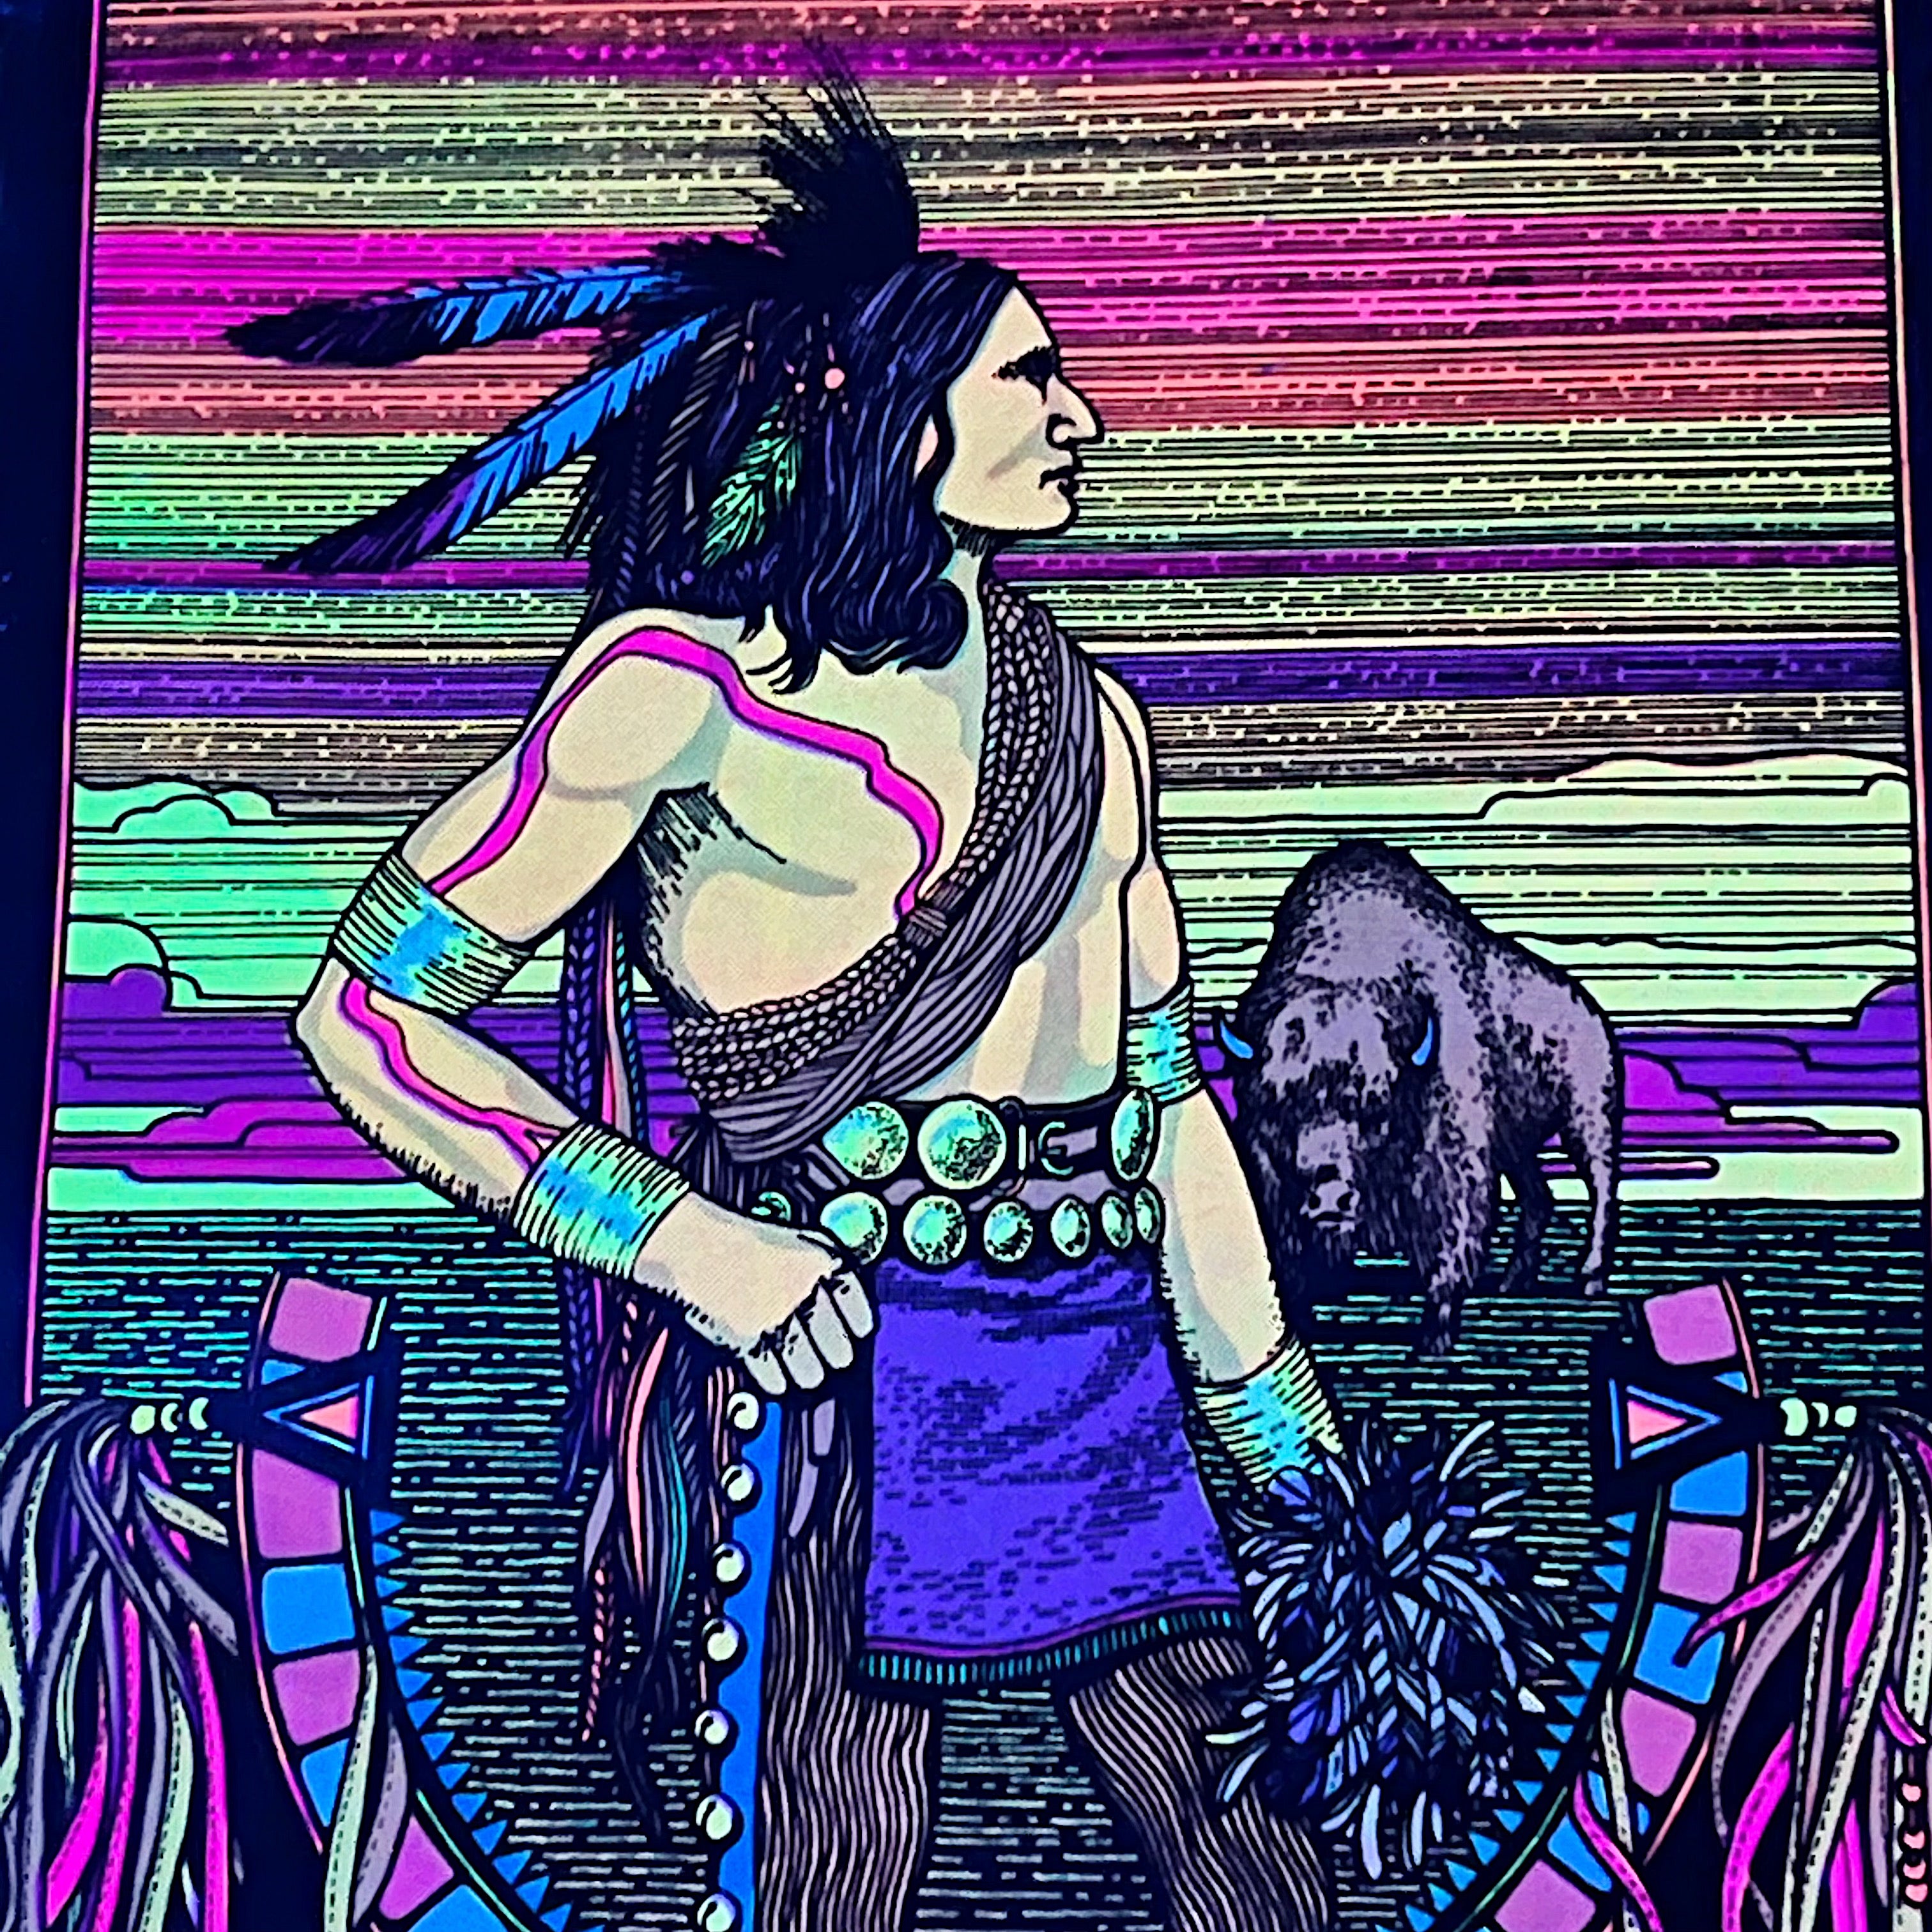 Rare 1970s Sioux Black Light Poster - Western Graphics Corporation No. 386 - Vintage Head Shop Art - Rare Hippy Posters - 31" x 18" - AS IS